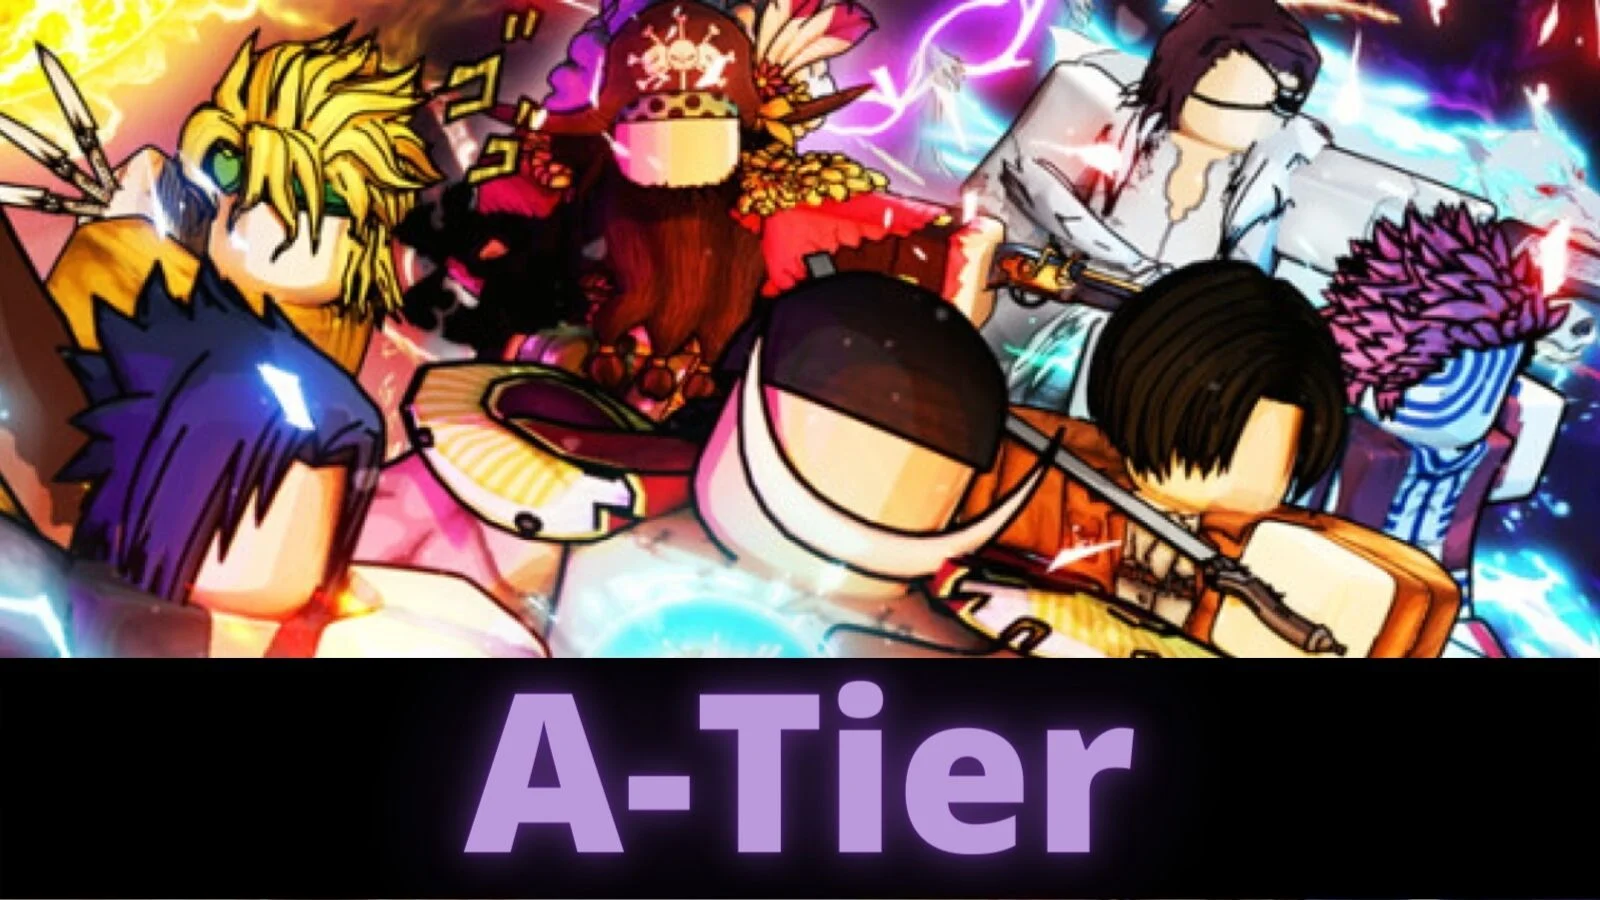 All Star Tower Defence Tier List 